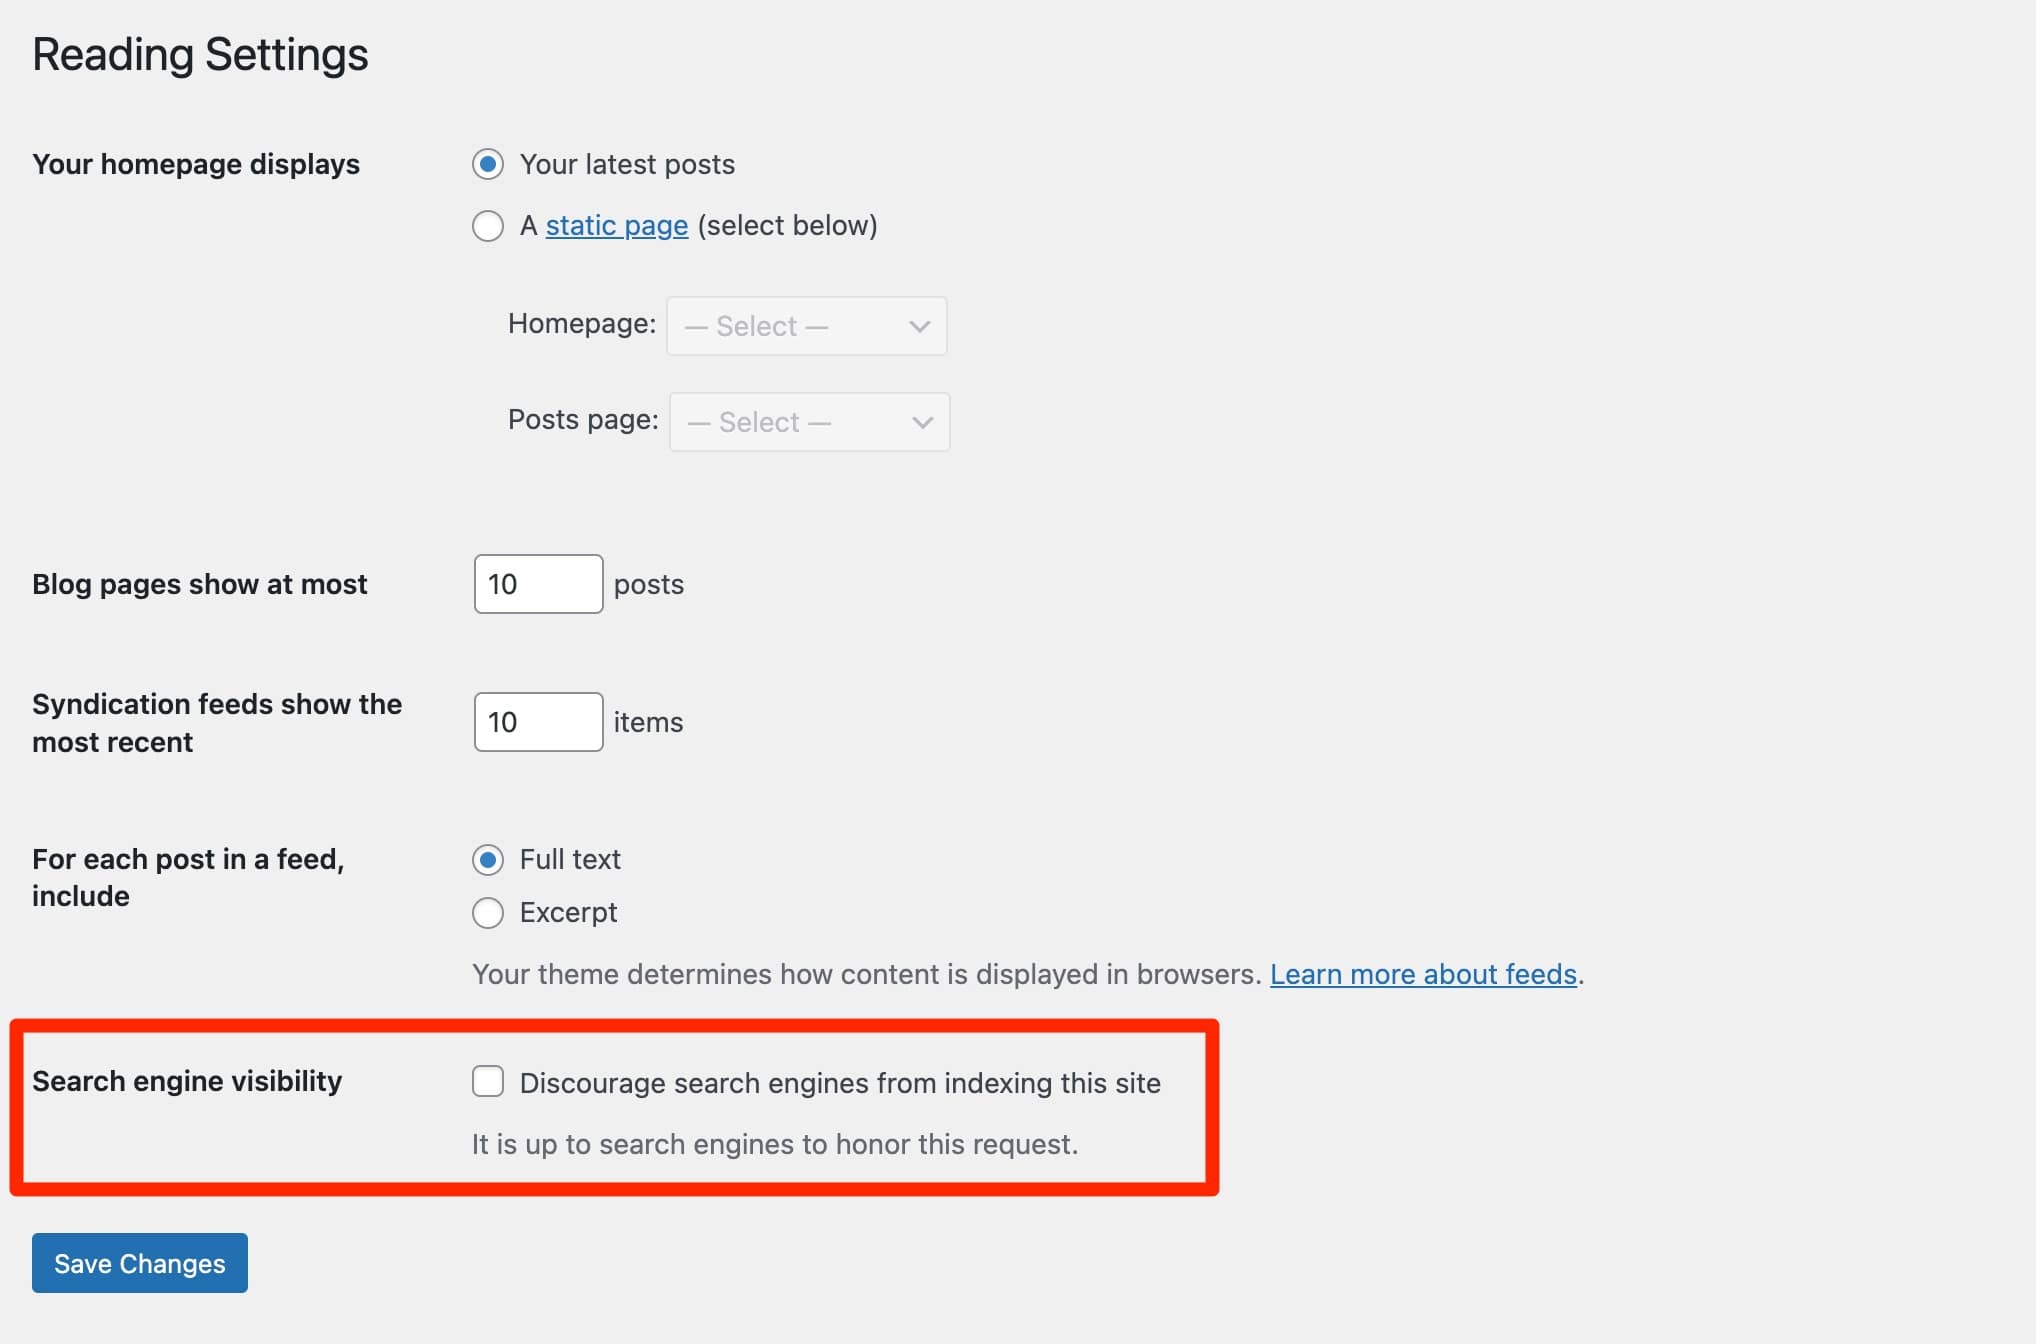 WordPress offers an option to discourage search engines from indexing your site. 